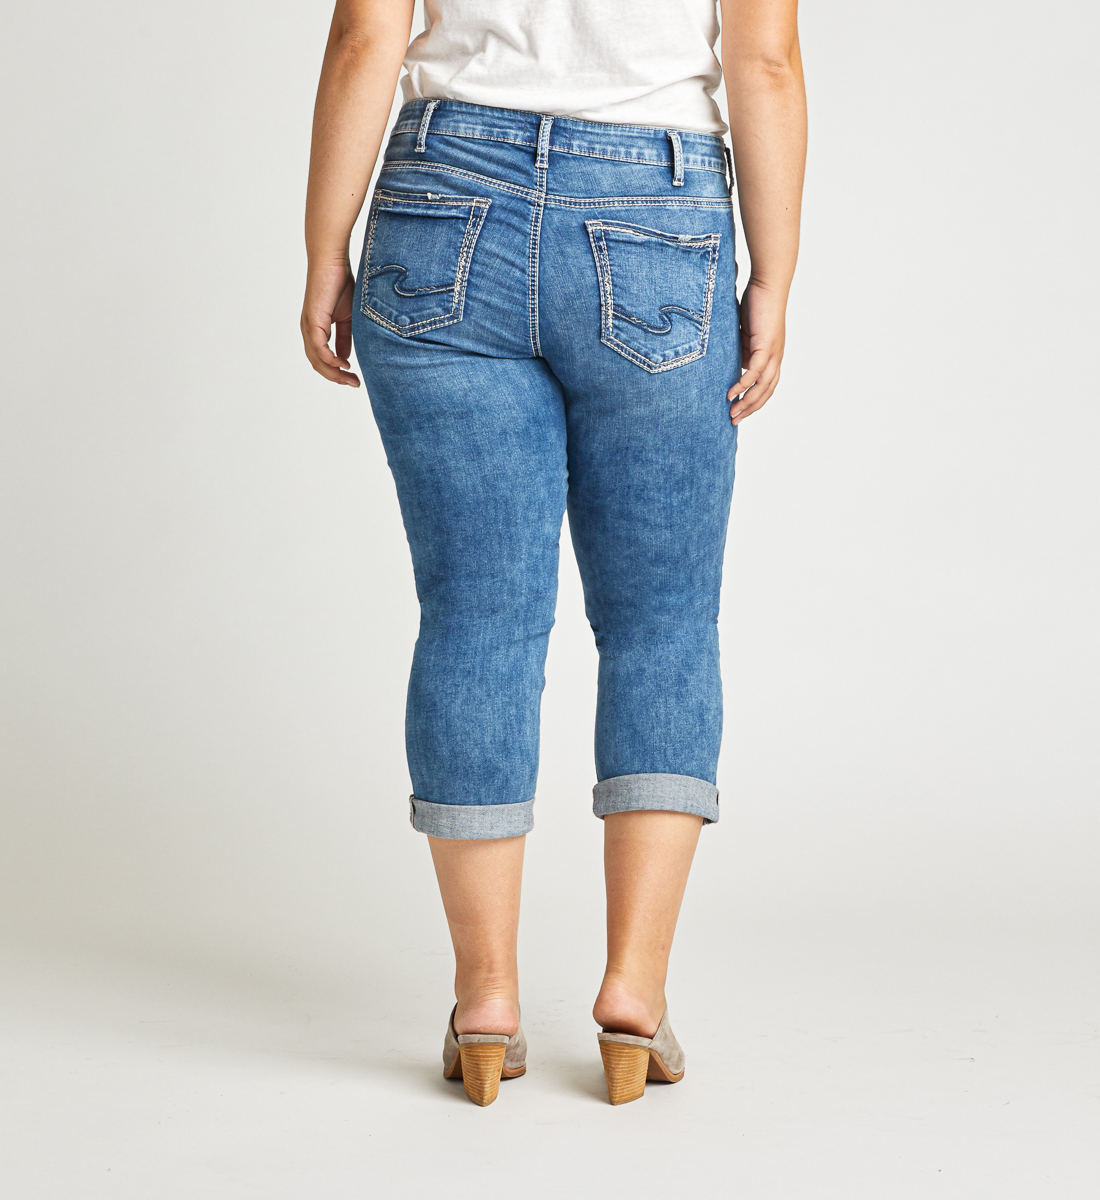 Silver Jeans Co Womens Plus Size Elyse Mid Rise Skinny Jeans